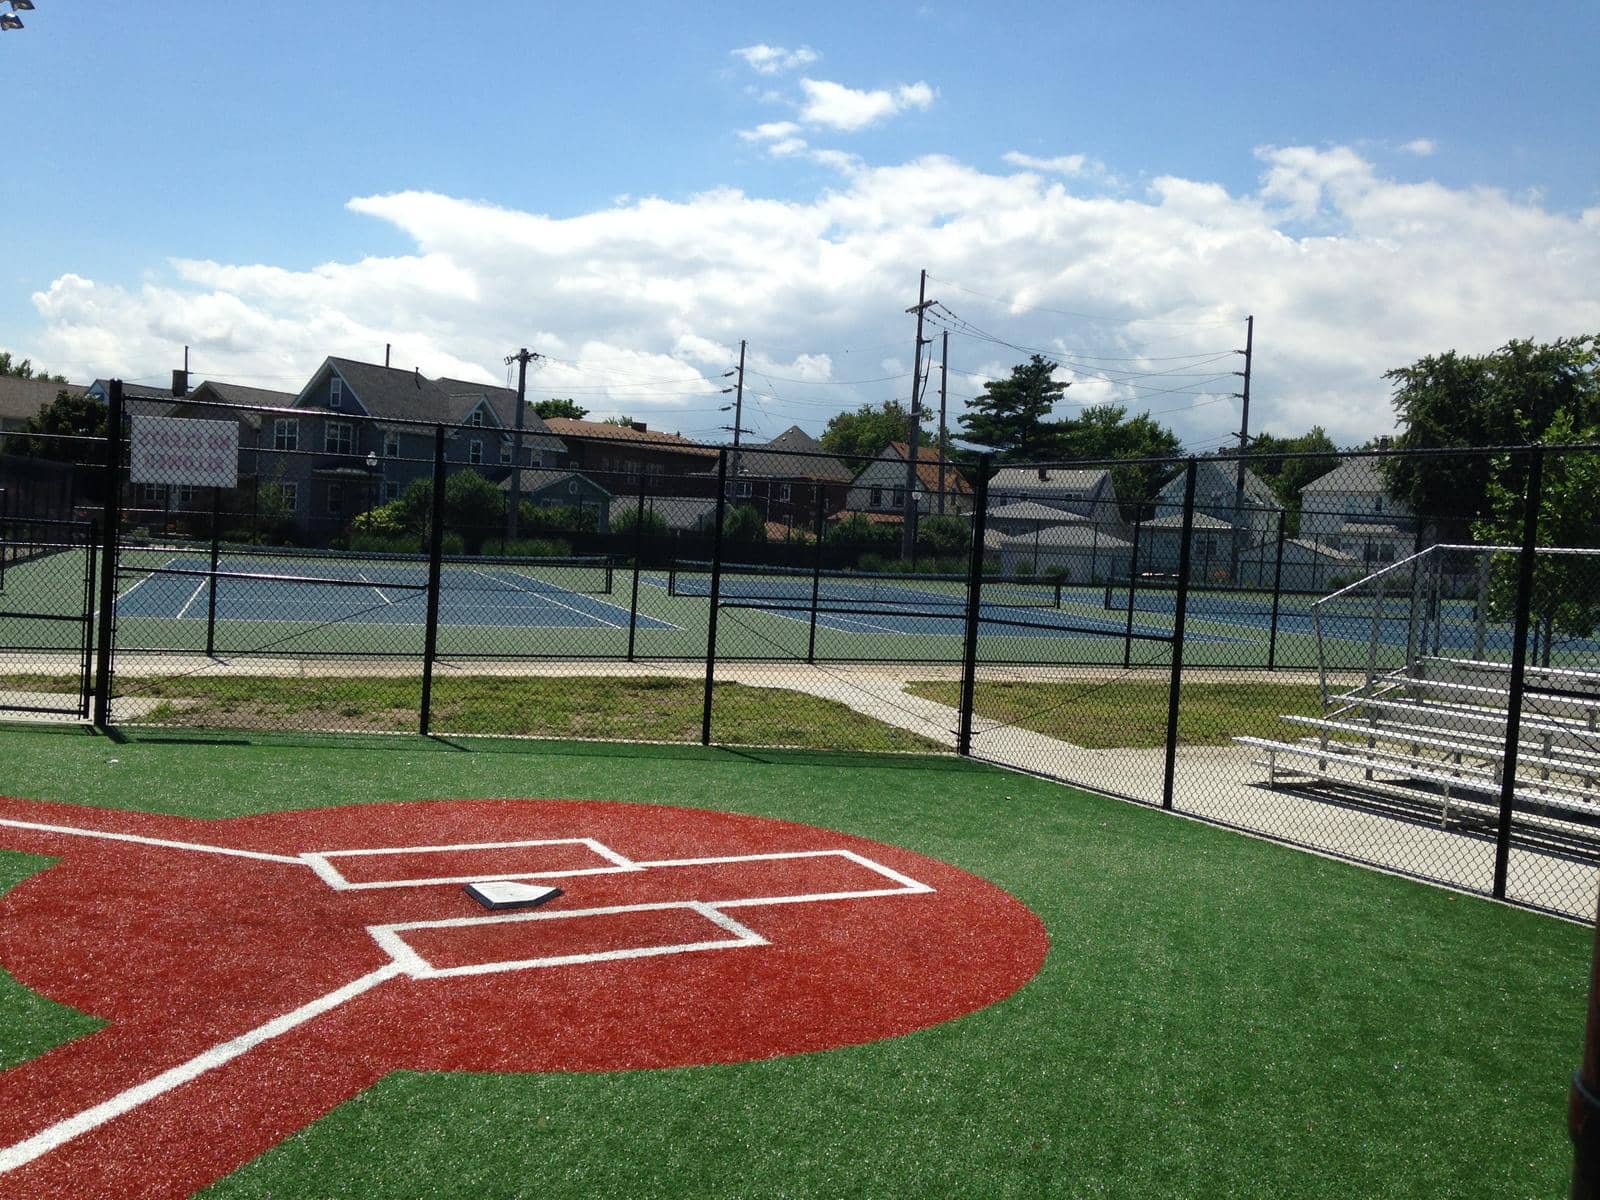 T-ball field on artificial turf